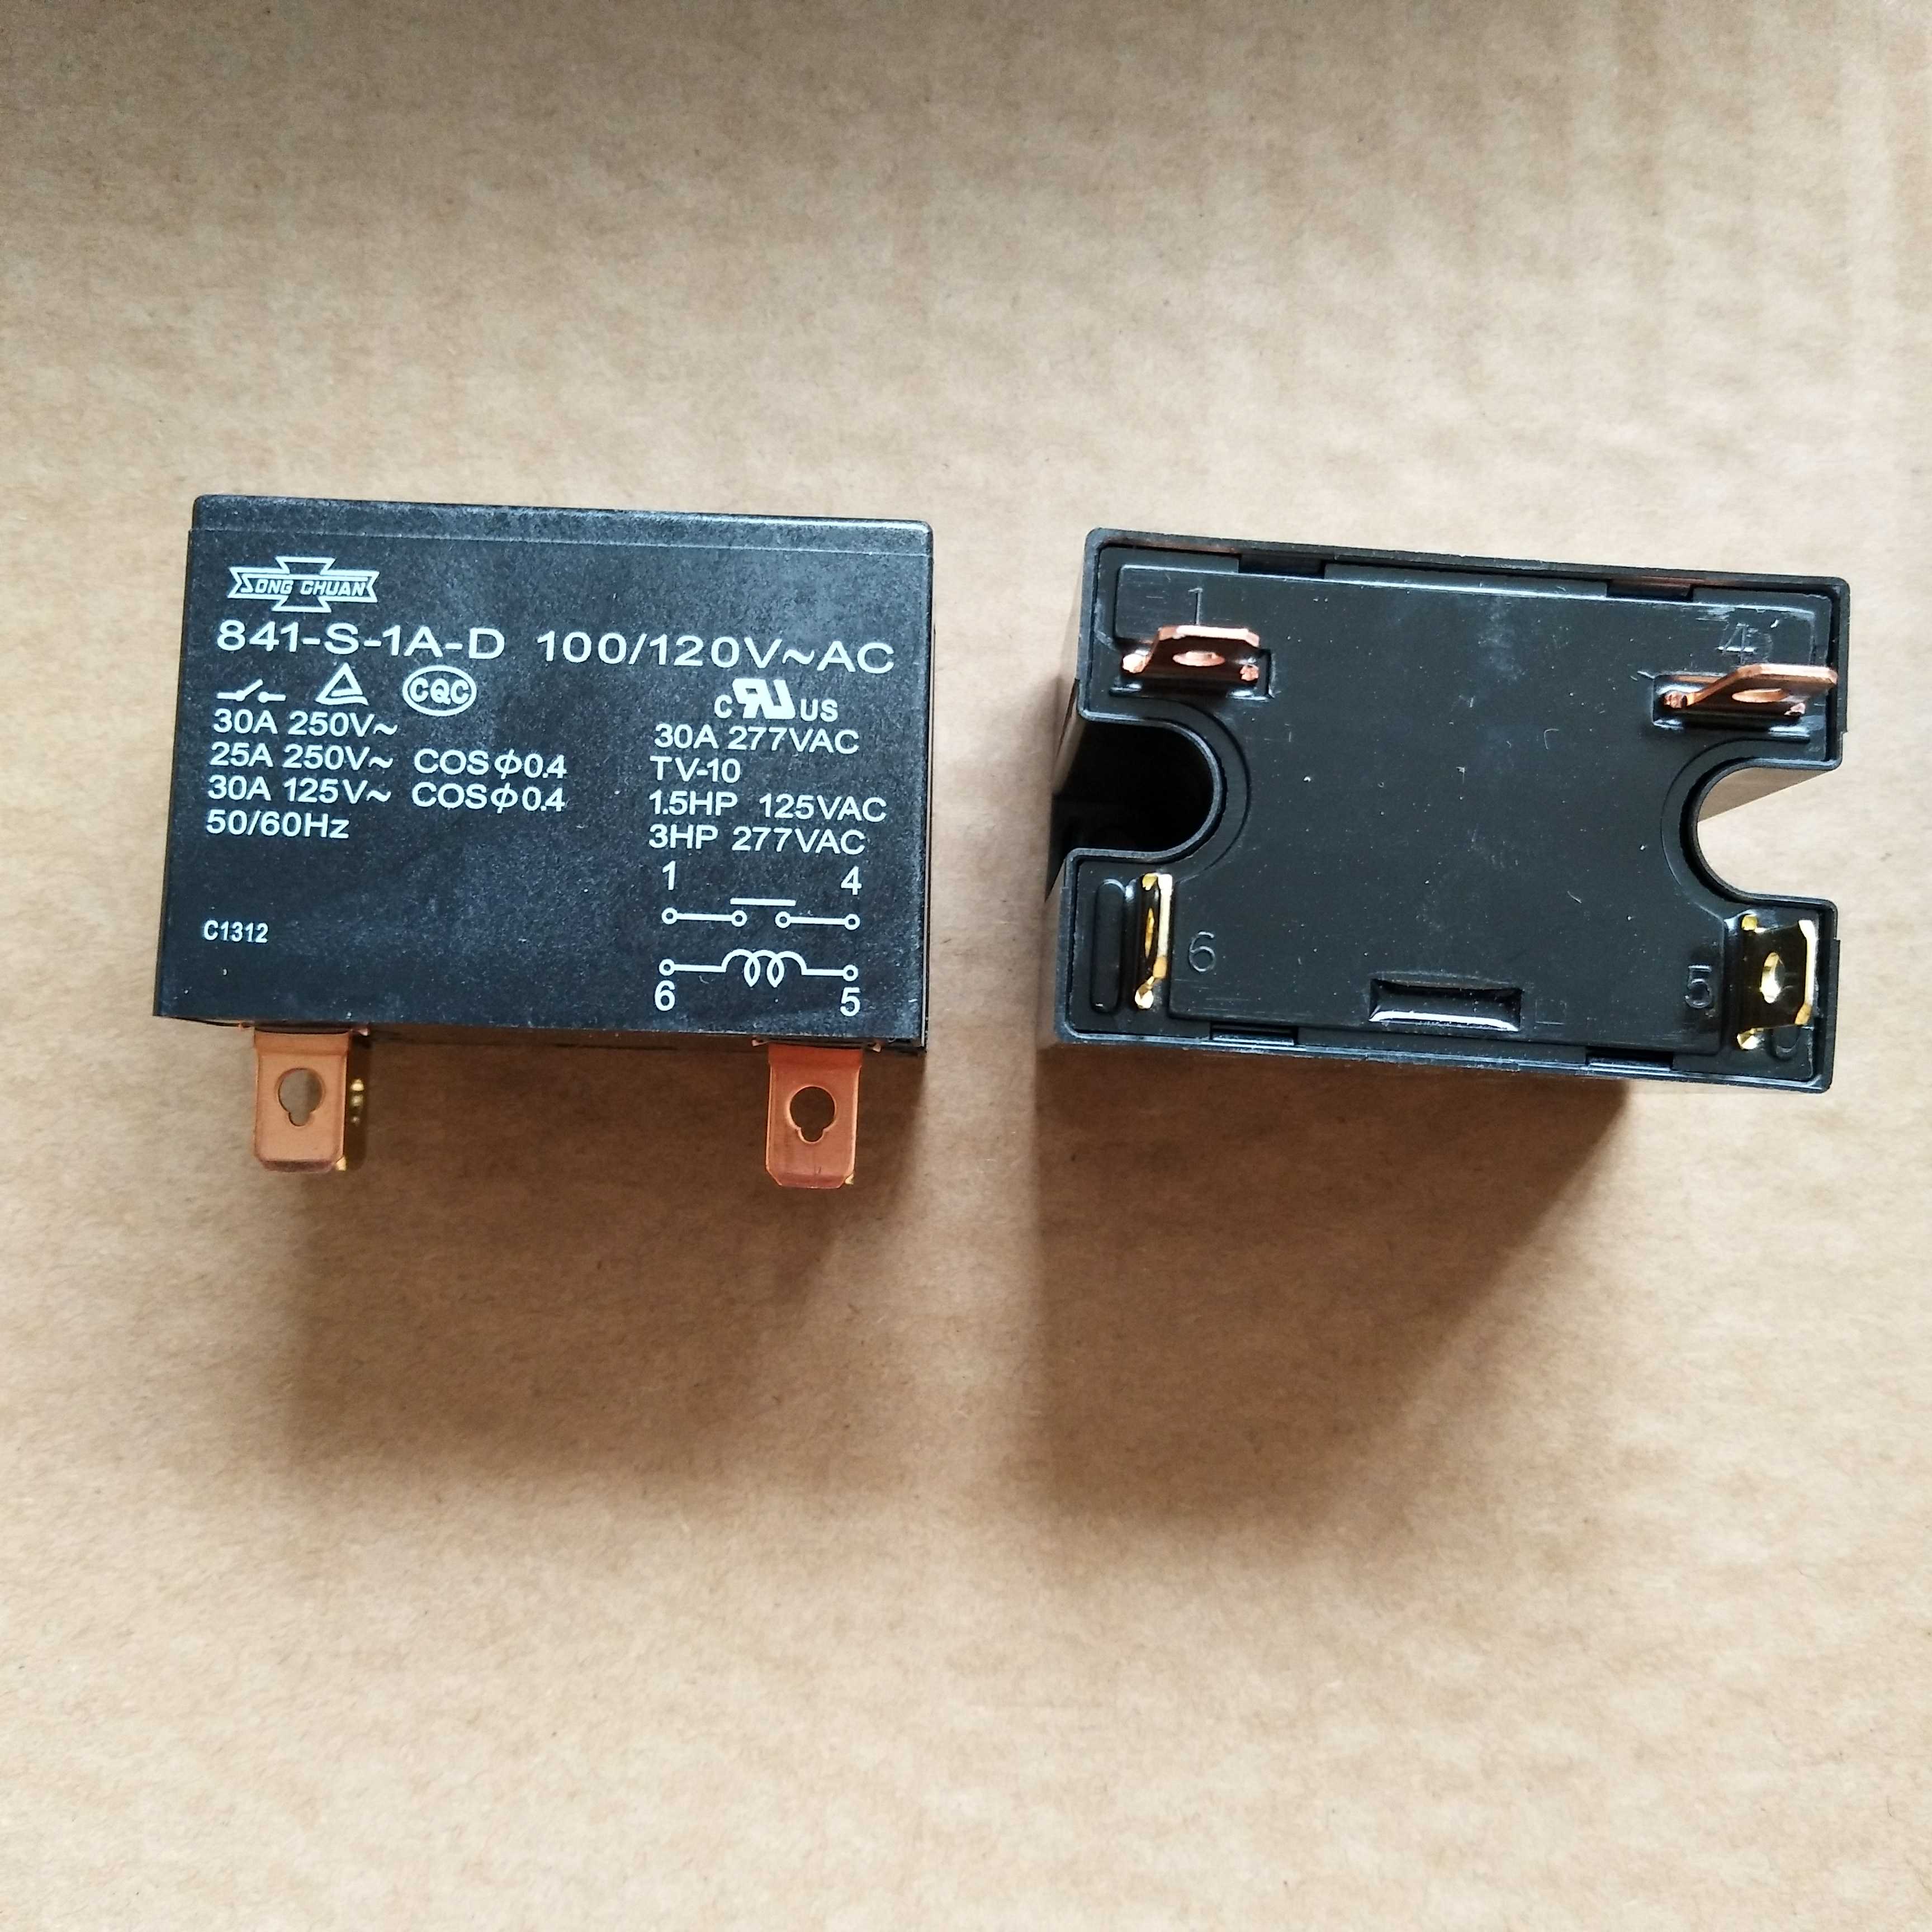 Free shipping(2pieces/lot)Original New SONG CHUAN 841-S-1A-D-100/120VAC 841-S-1A-D-200/240VAC 4PINS 30A Power Relay от DHgate WW